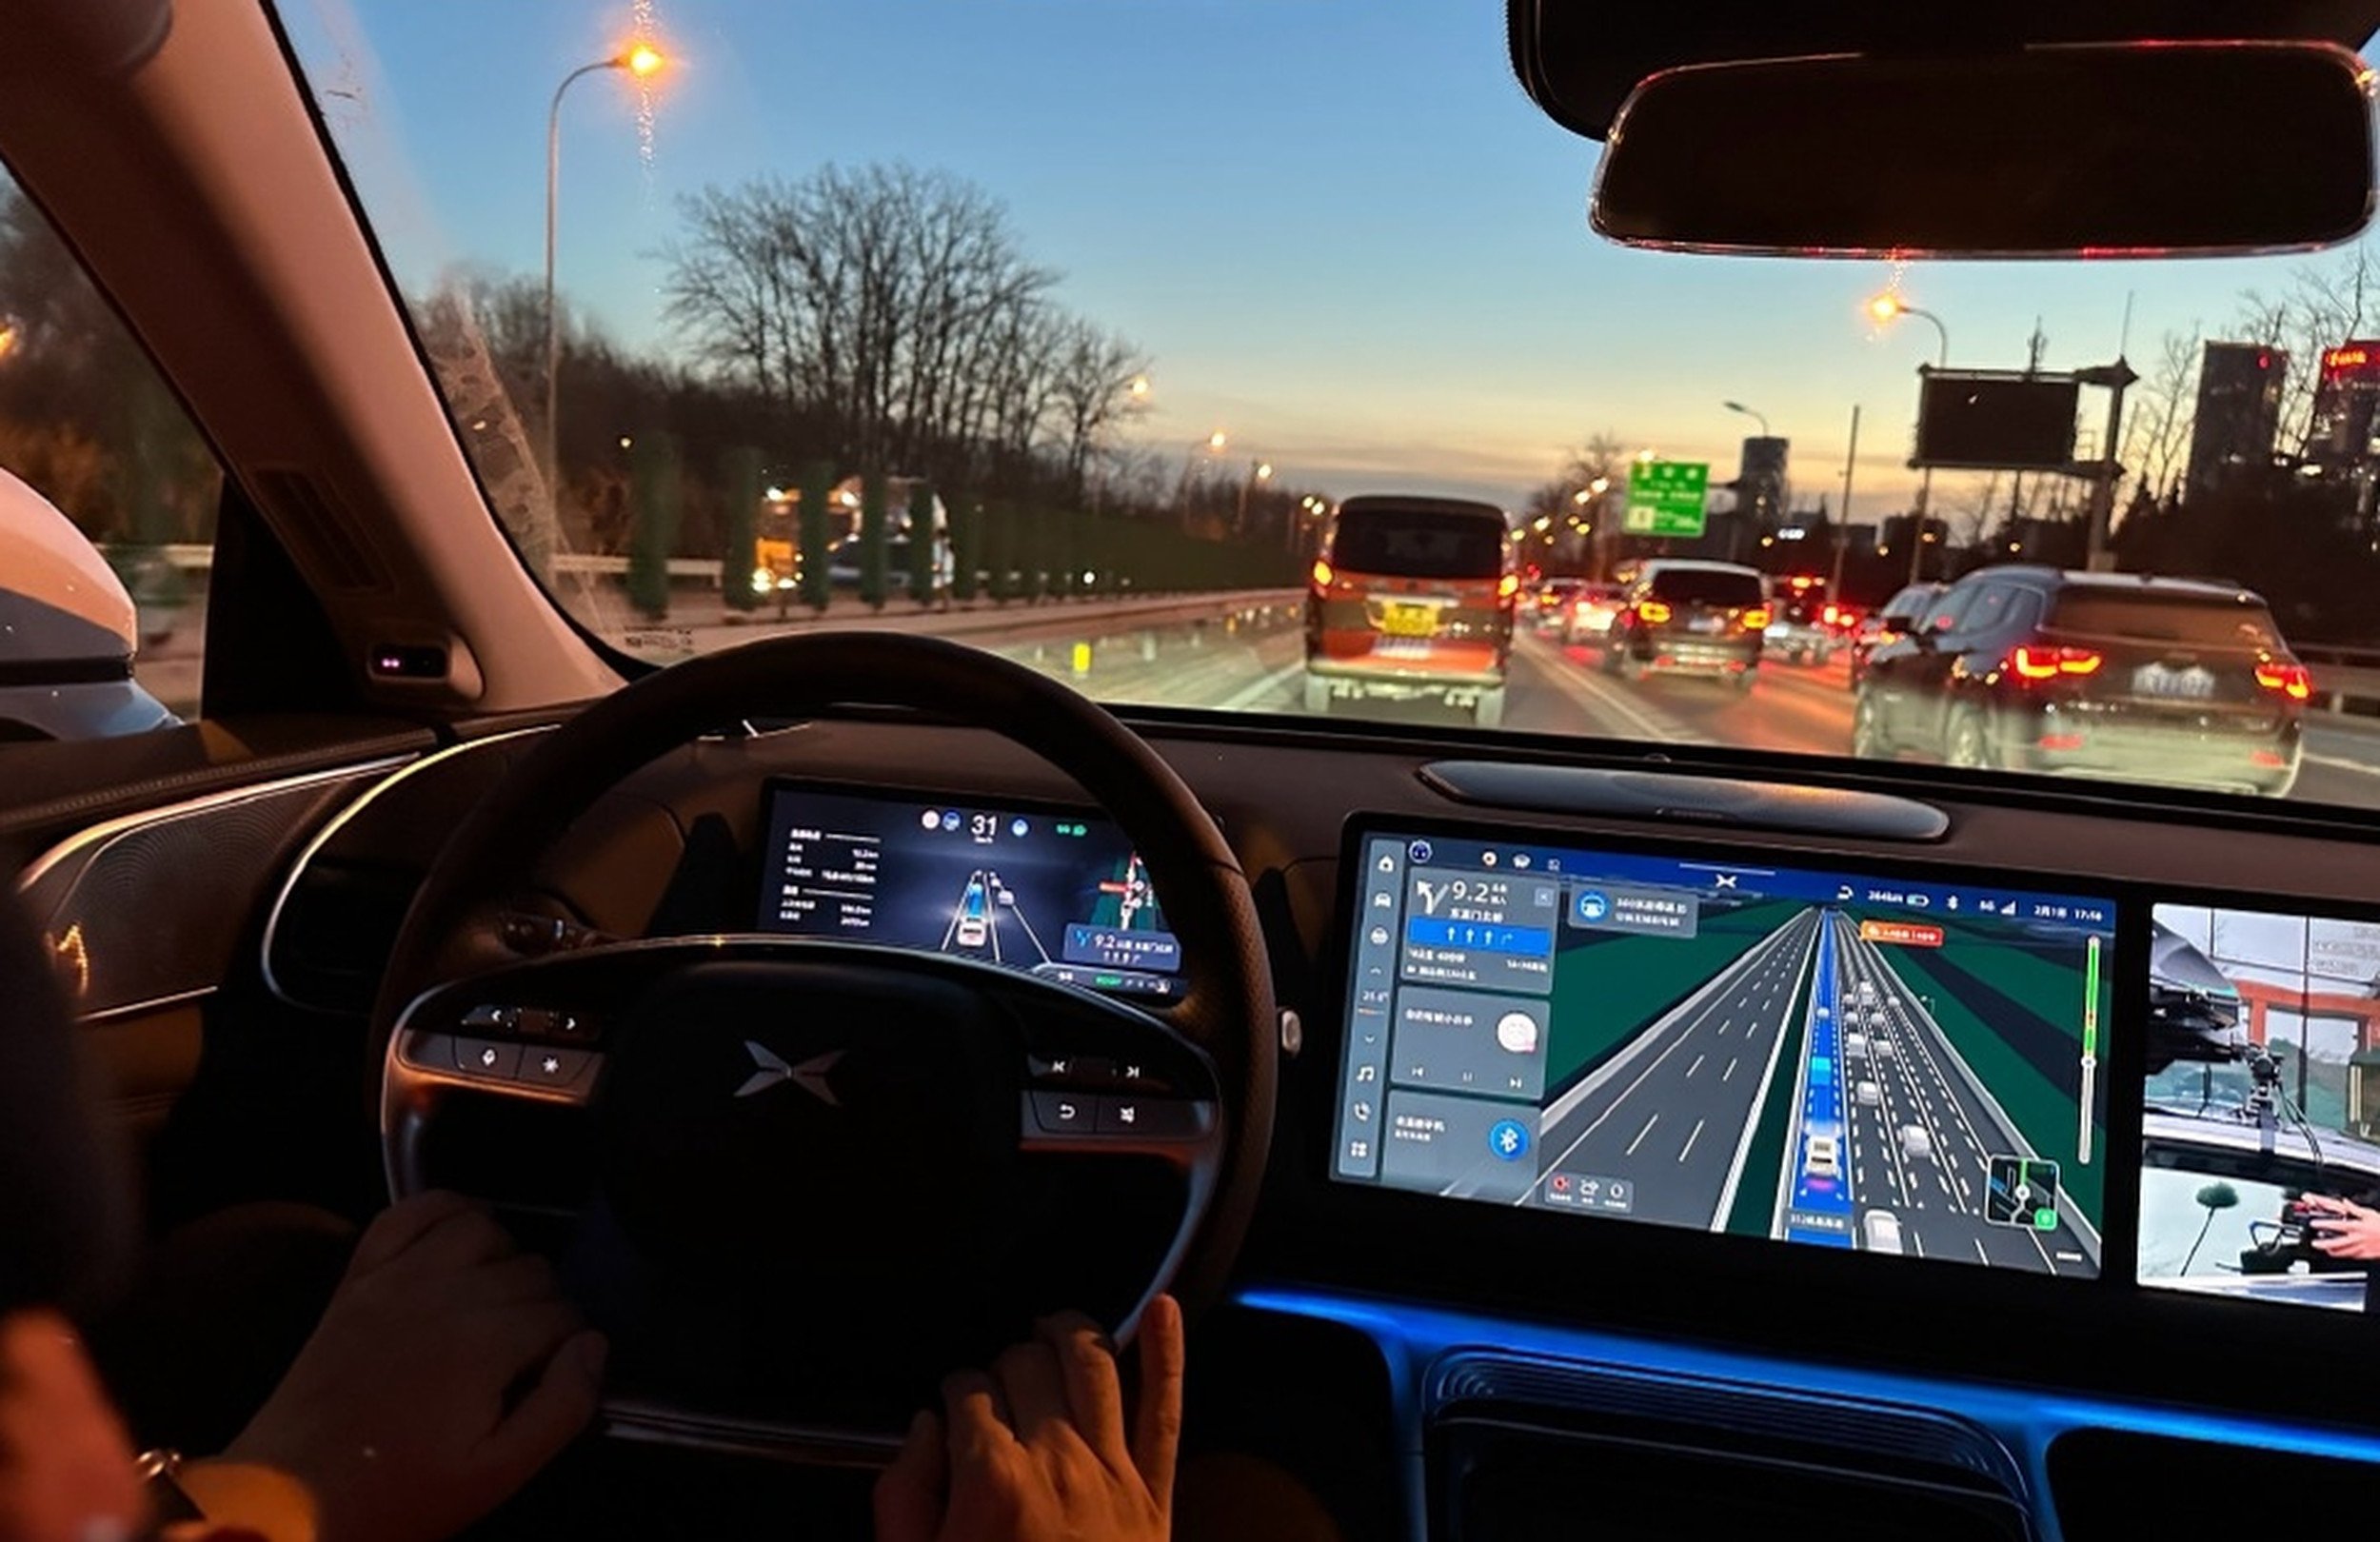 Guangzhou-based Xpeng’s X NGP (navigation guided pilot) software allows its cars to navigate autonomously in four Chinese cities, reinforcing its bid for a top position in developing autonomous cars. Photo: Weibo